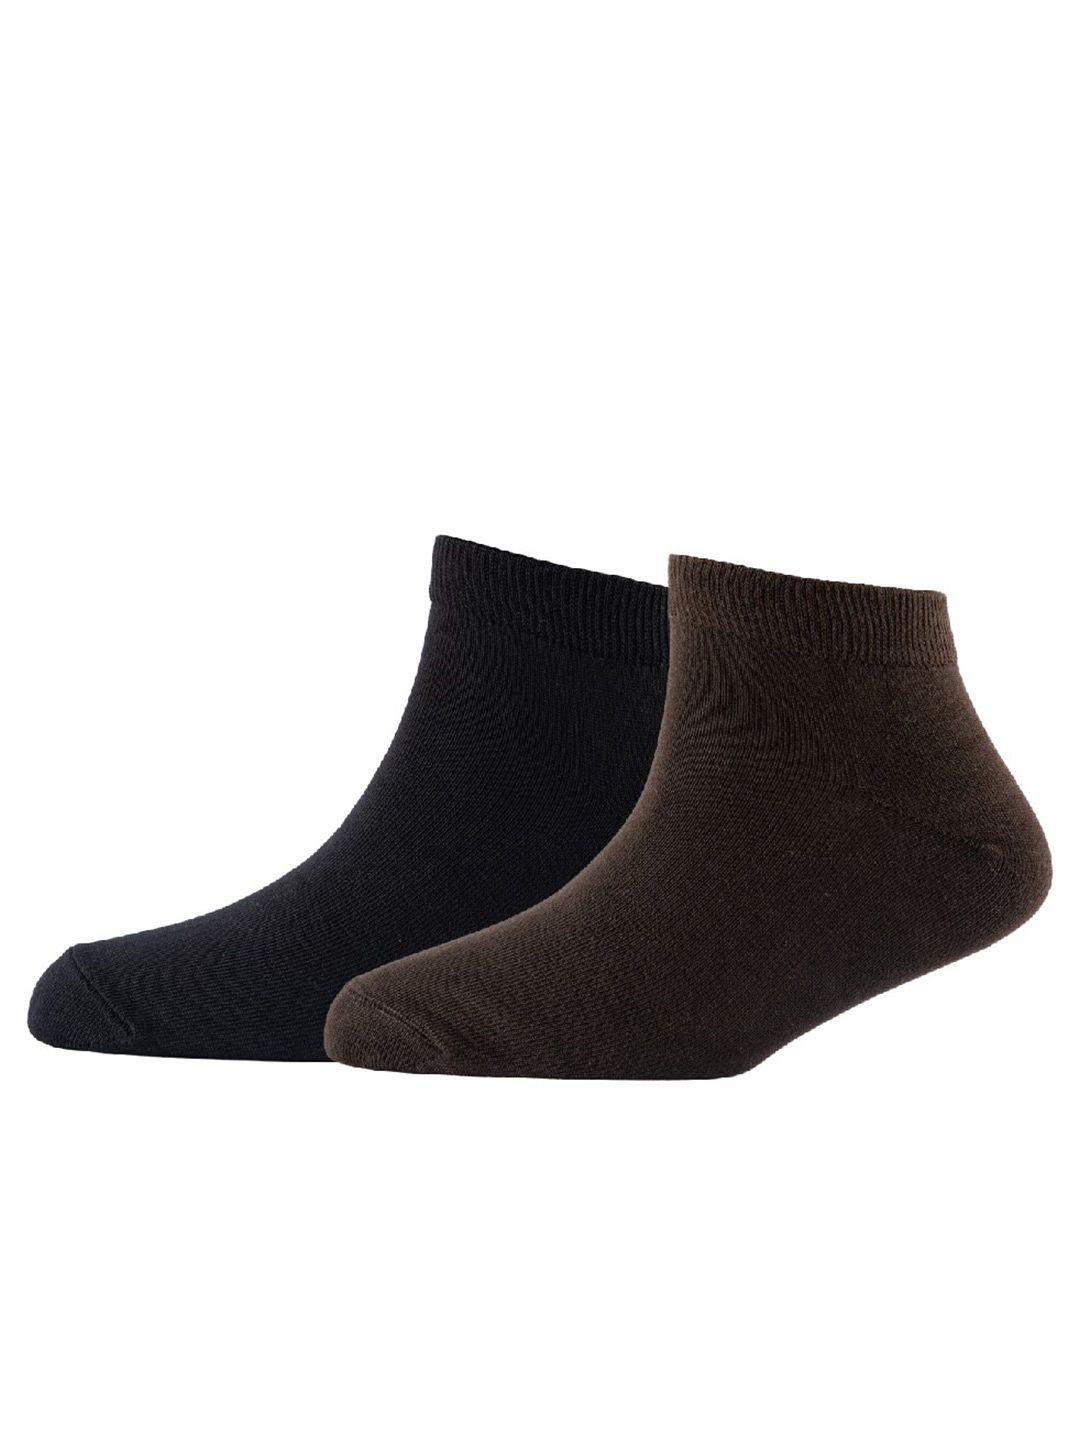 cotstyle men pack of 2 cotton ankle length socks